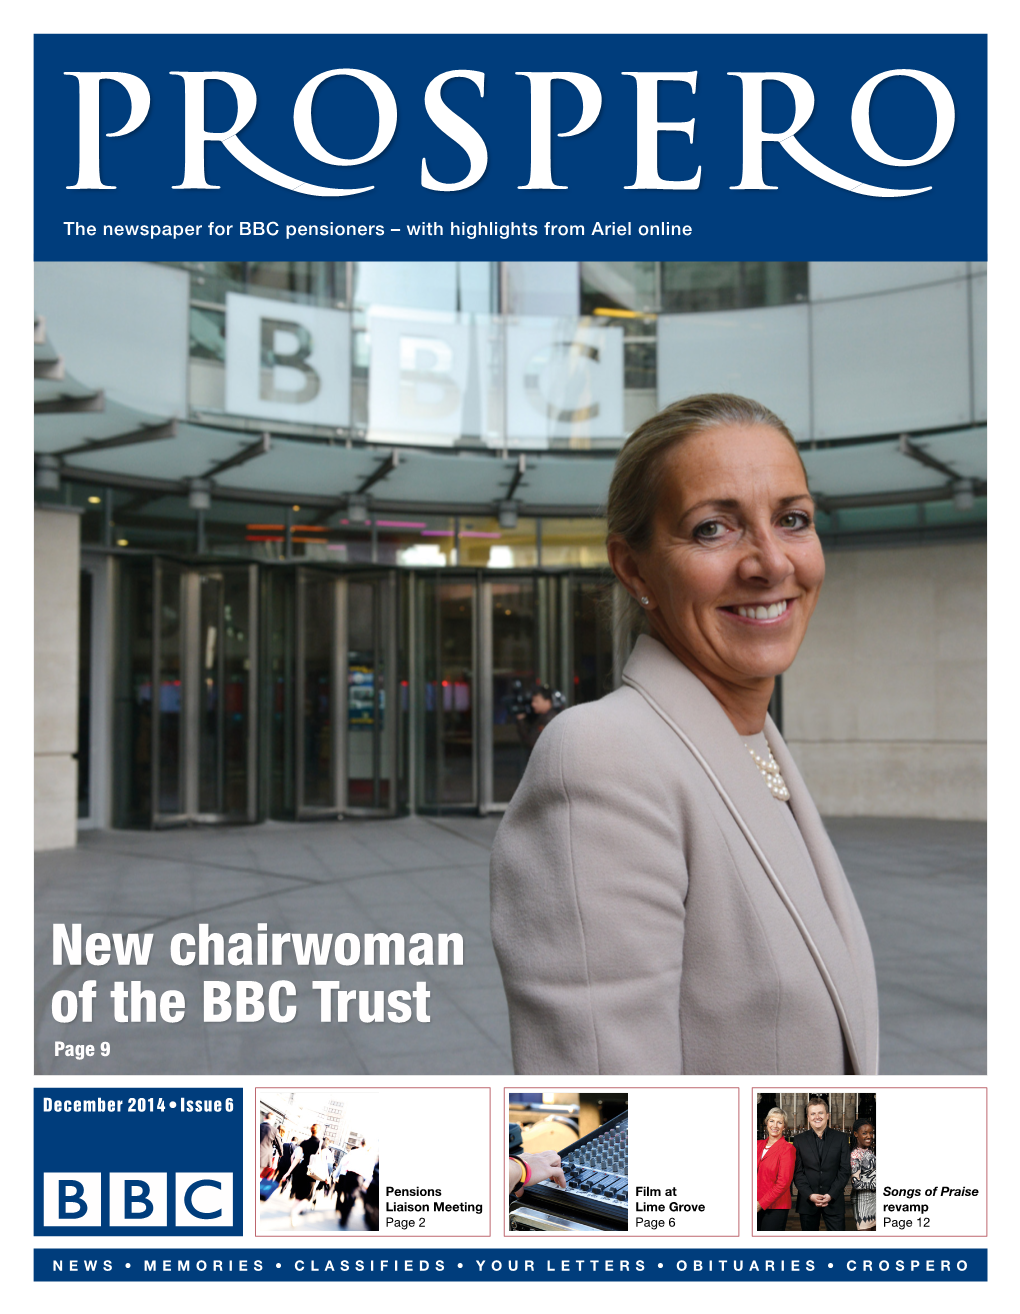 New Chairwoman of the BBC Trust Page 9